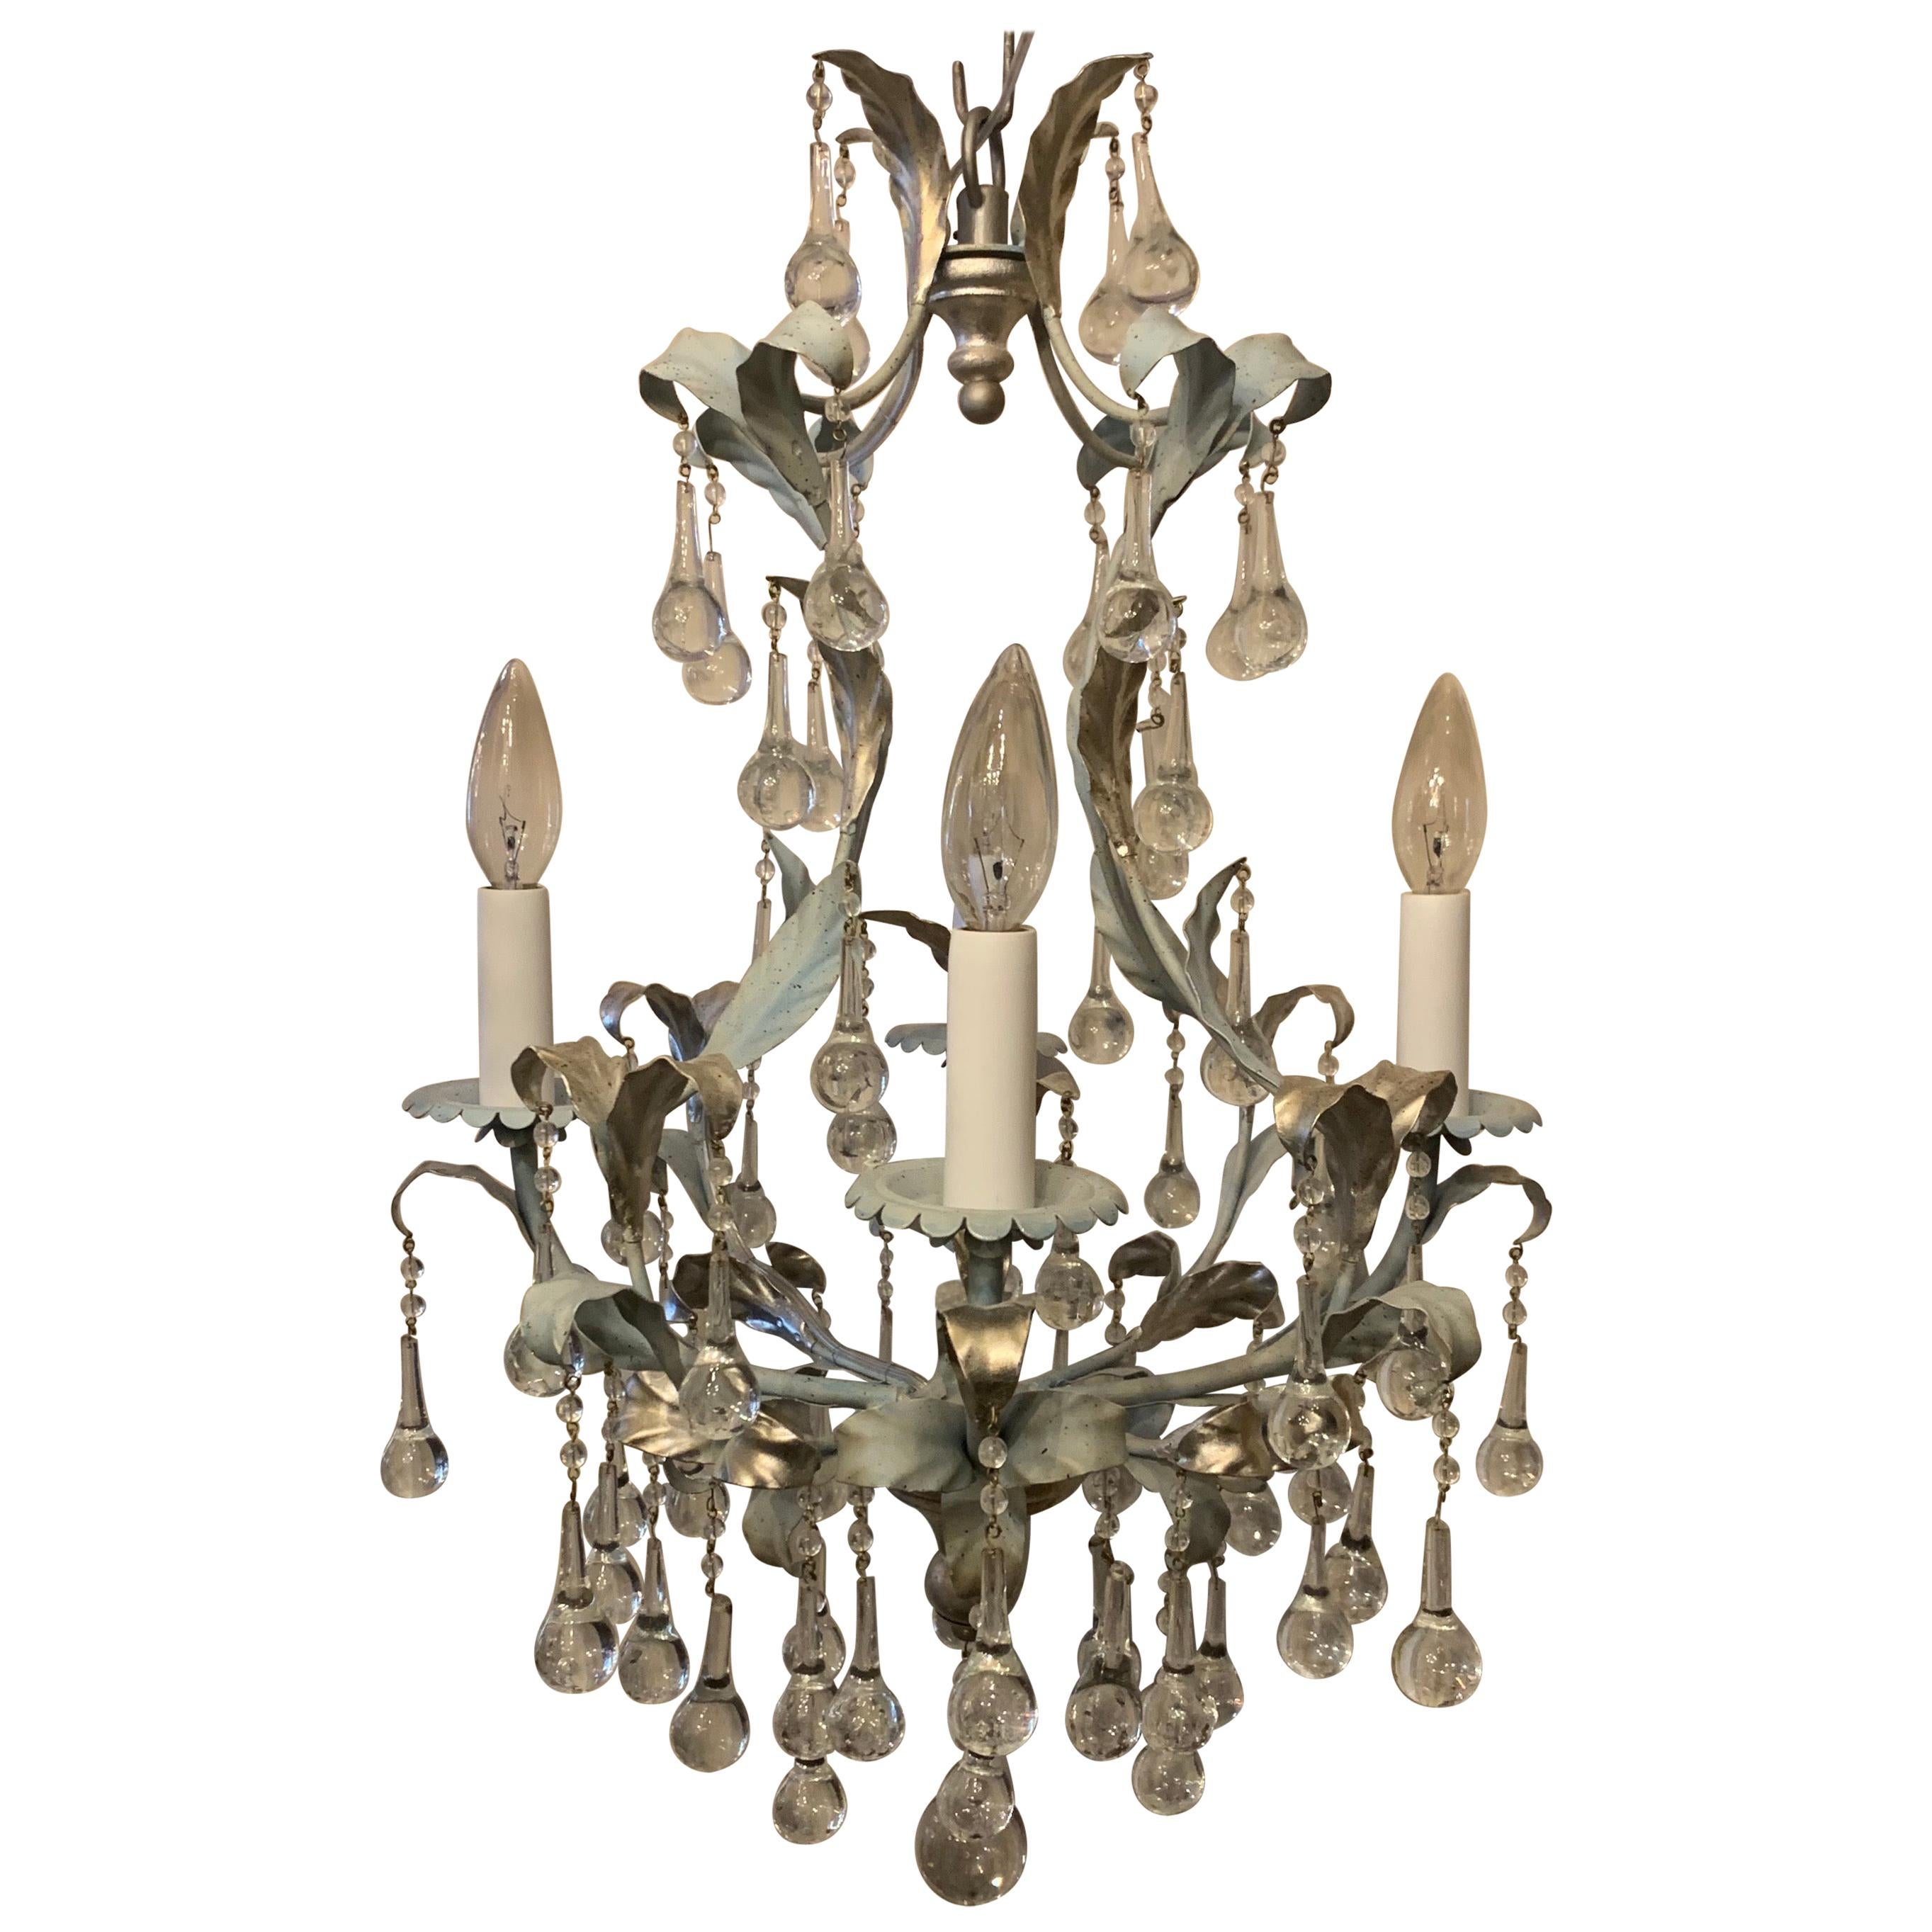 Wonderful Tole Hand Painted Blue Silver Leaf Crystal Petite Chandelier Fixture For Sale